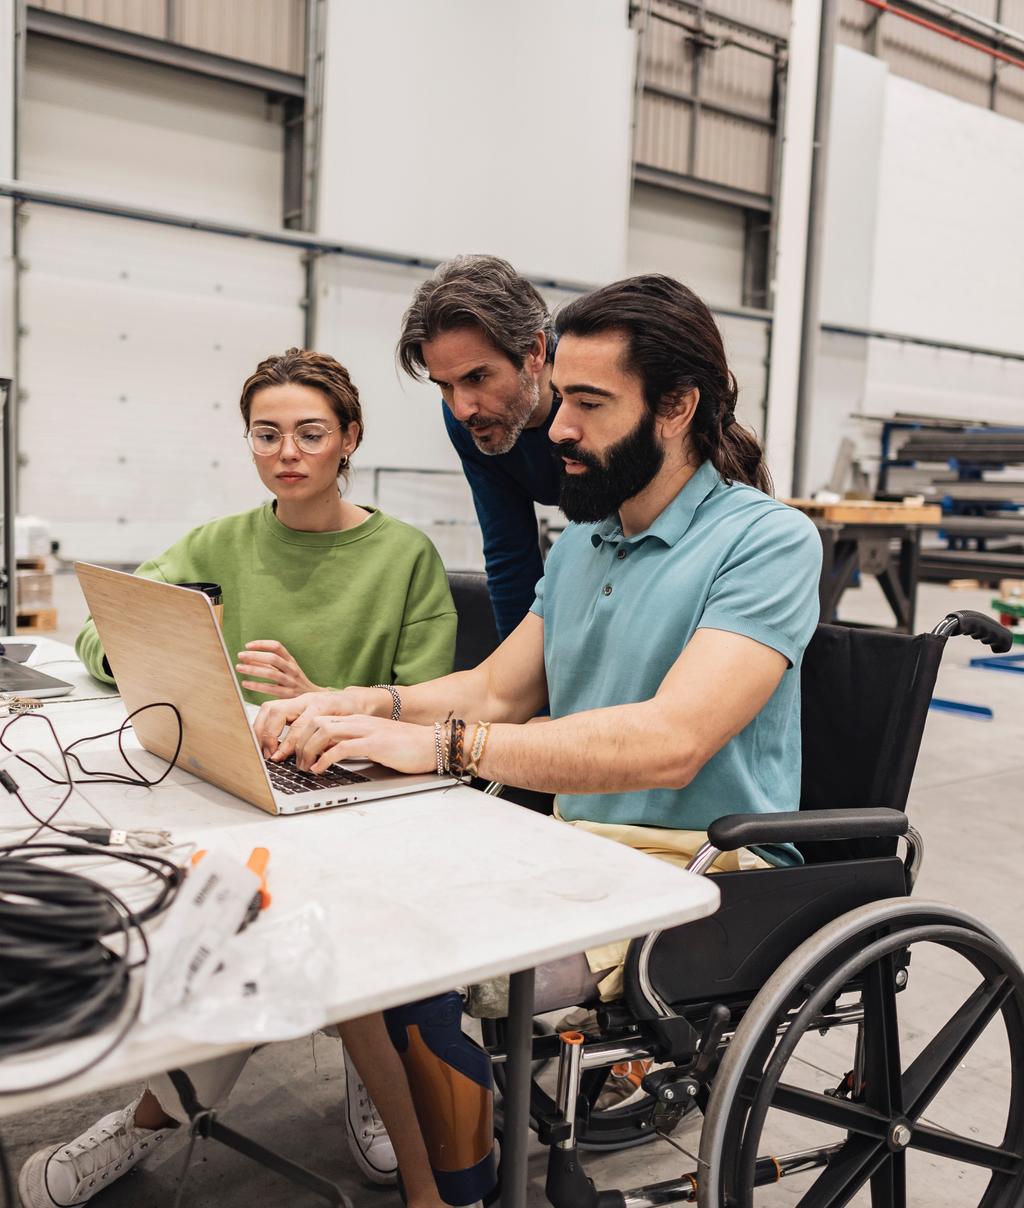 Engineer sitting in wheelchair working with colleagues in factory